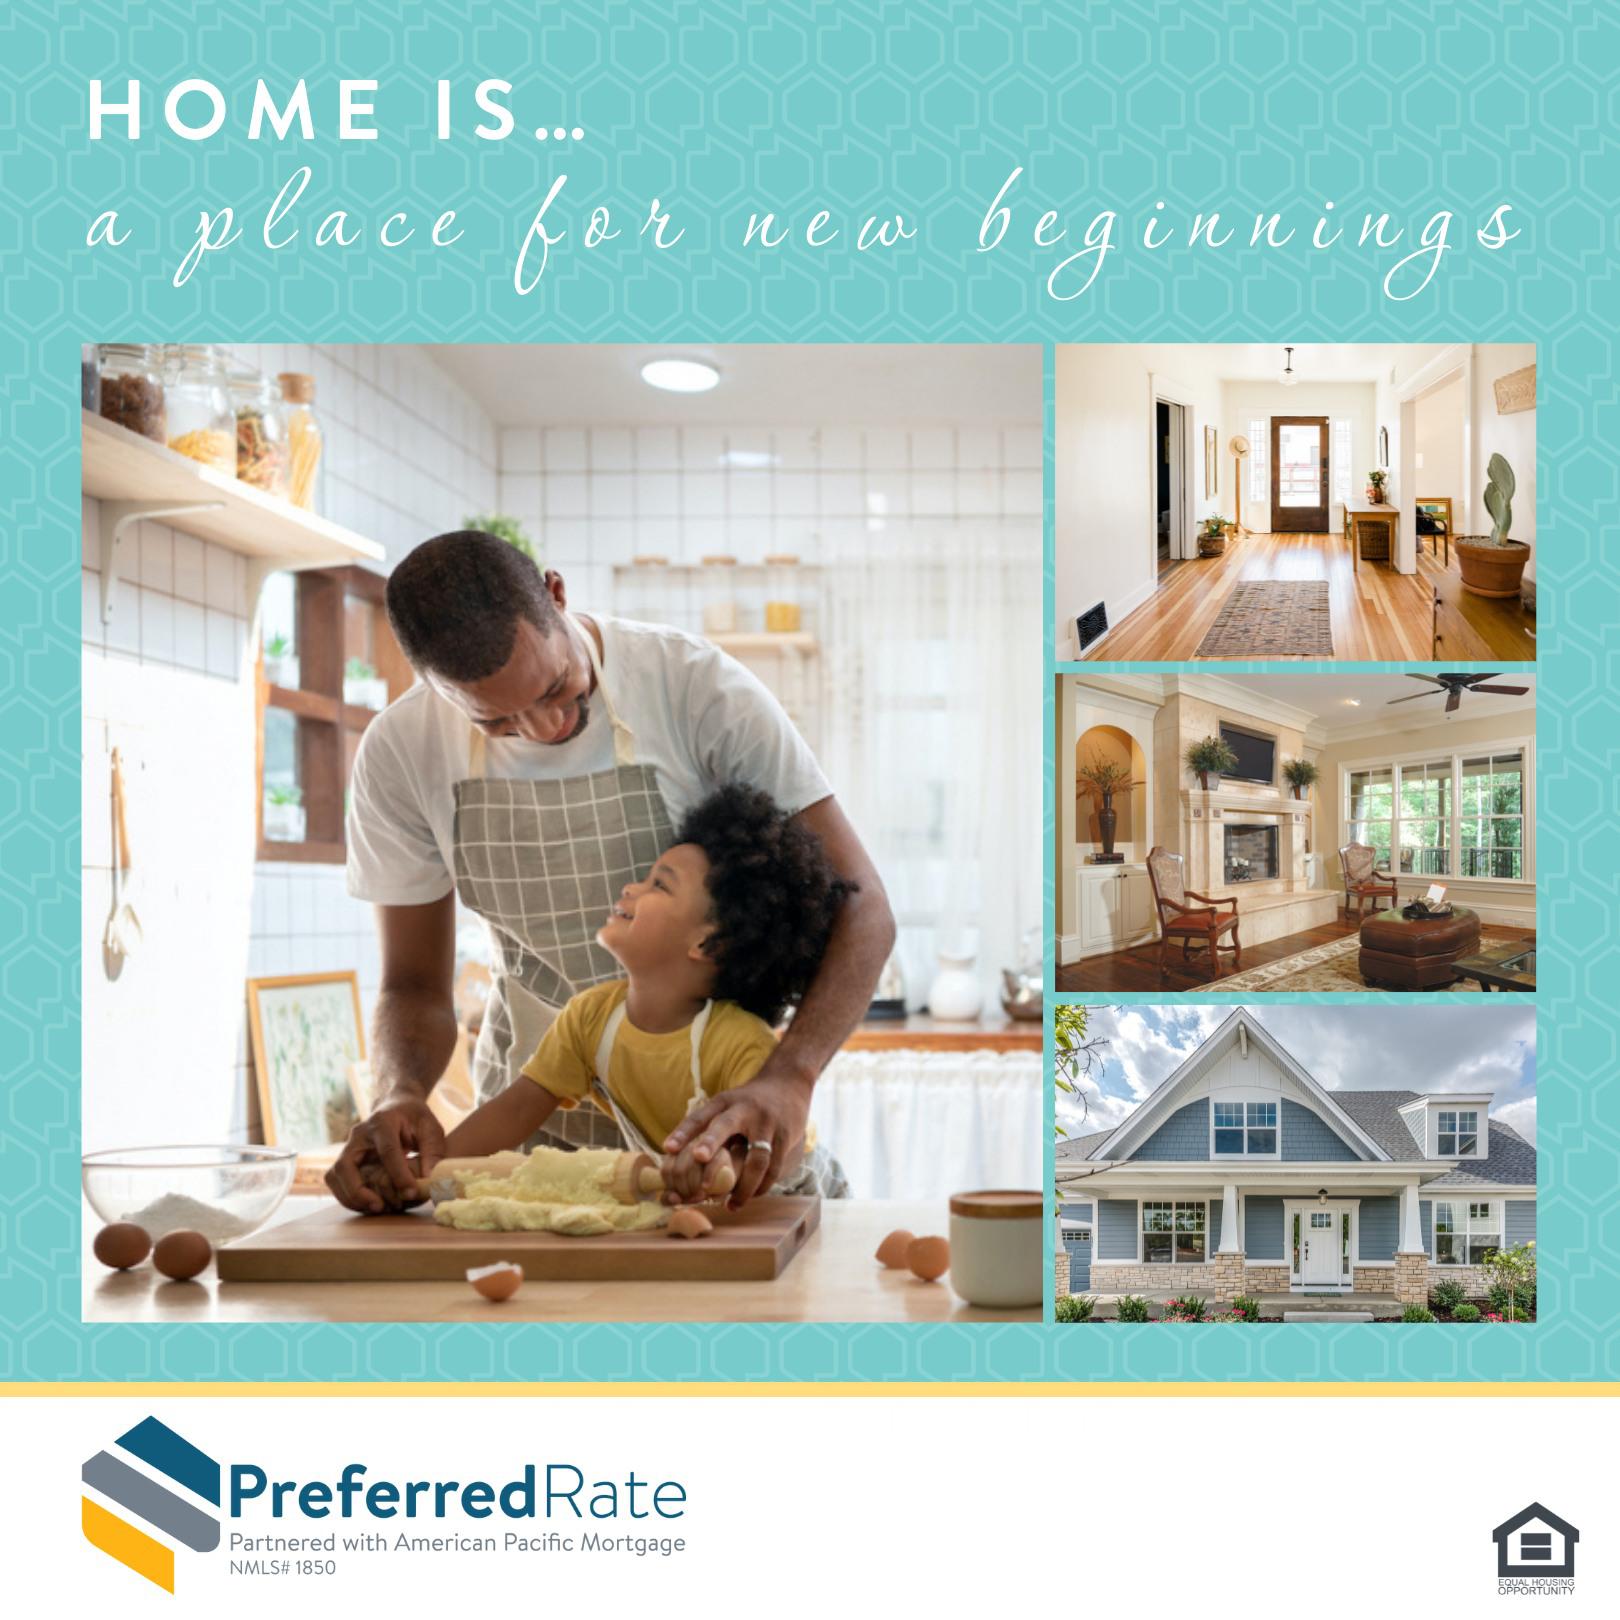 Home is a place for new beginnings. What's your favorite thing about homeownership?